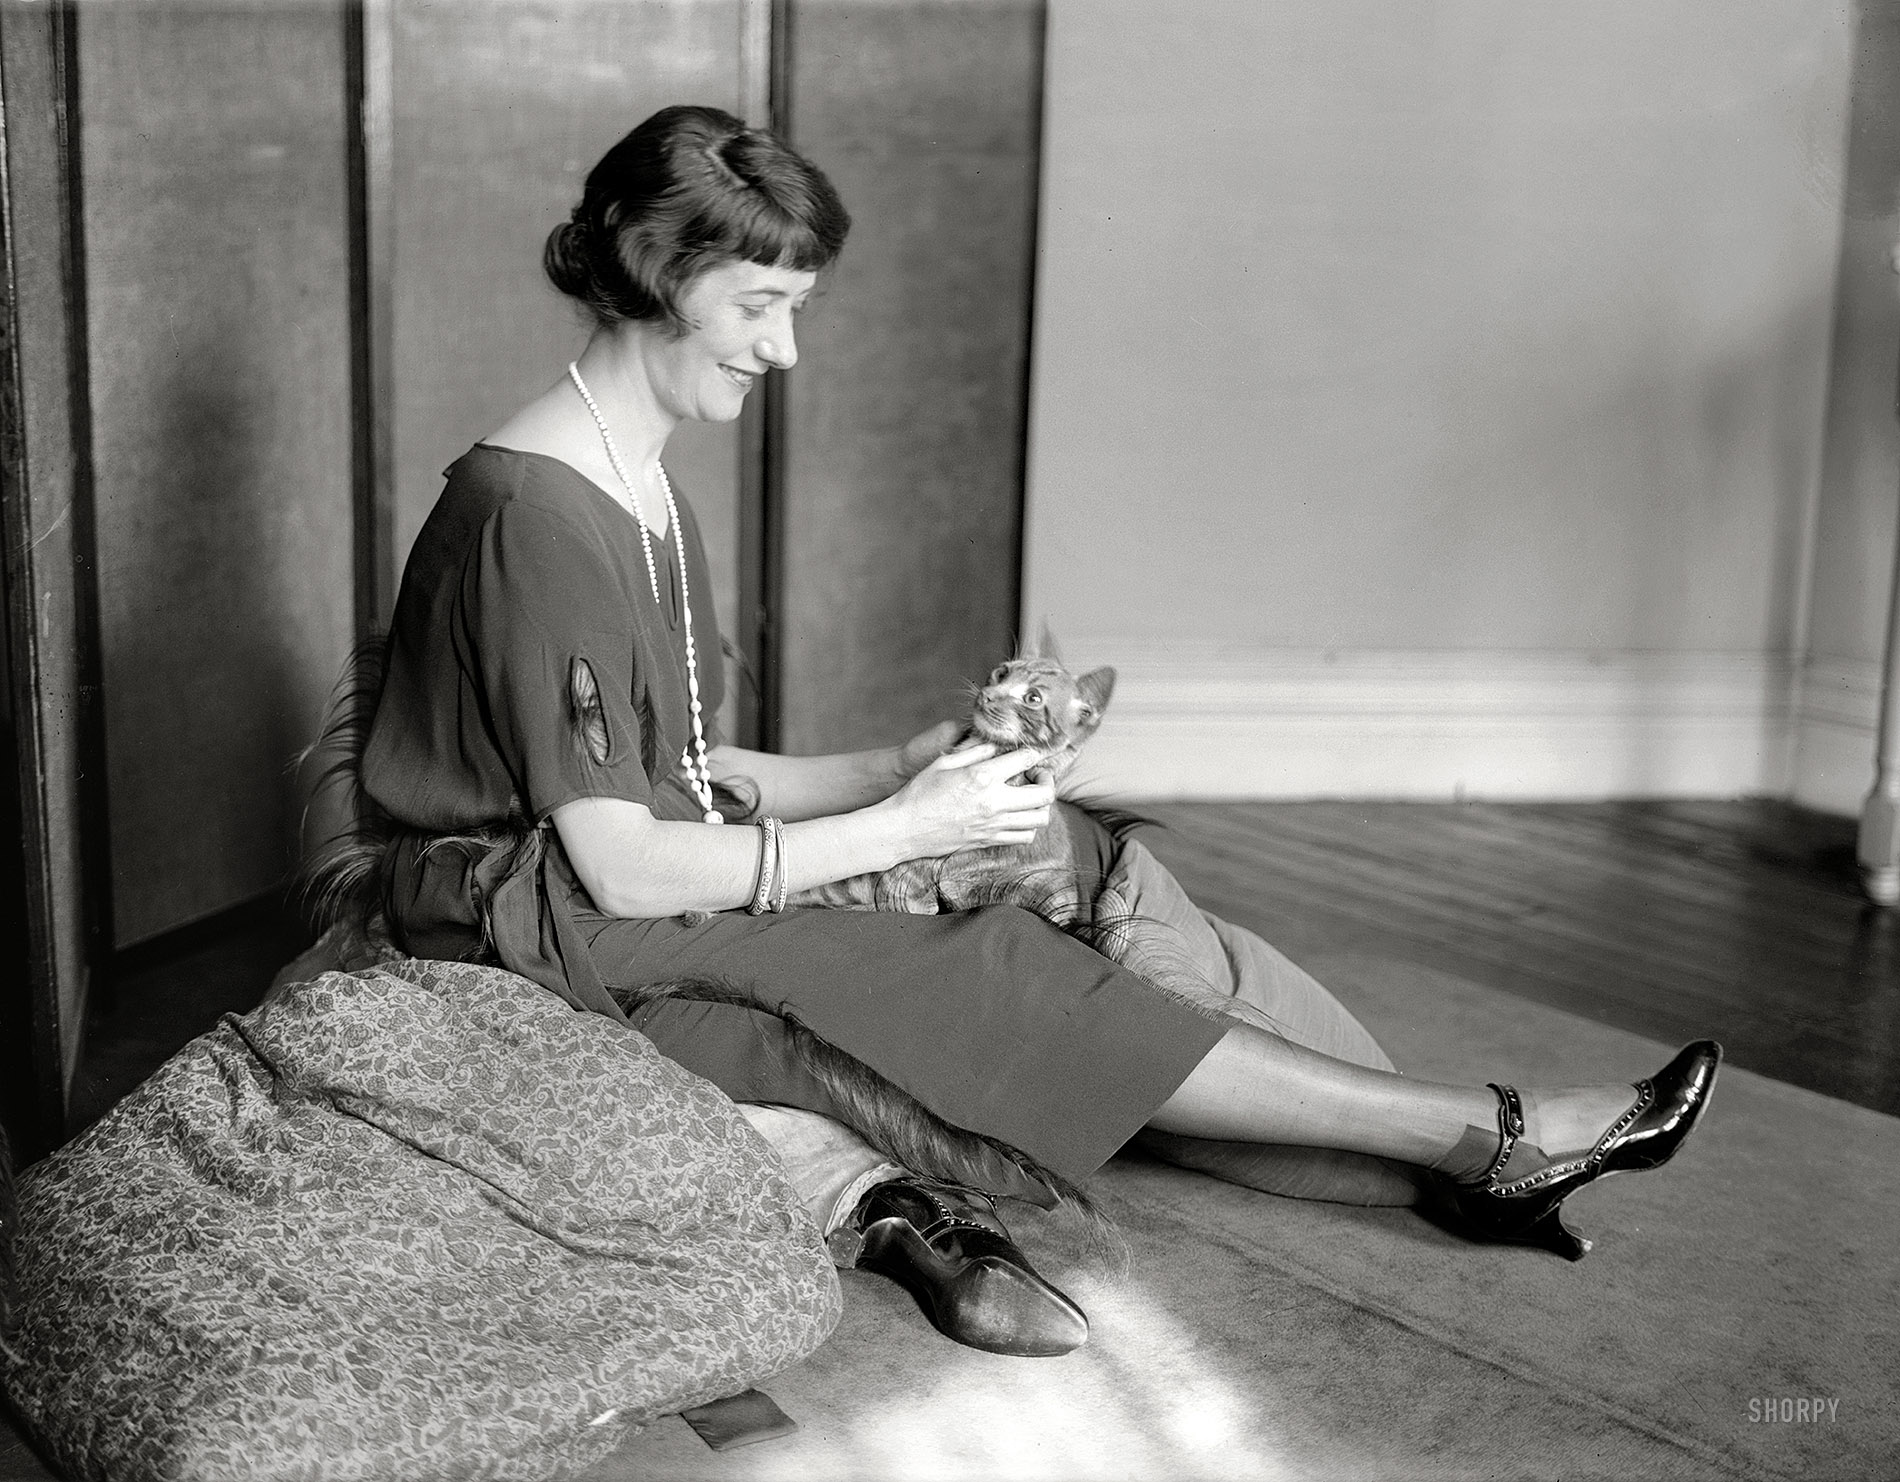 New York circa 1922. "Fontanne." The British actress Lynn Fontanne, for decades a fixture of the Broadway stage along with husband Alfred Lunt (not pictured). 5x7 glass negative, George Grantham Bain Collection. View full size.